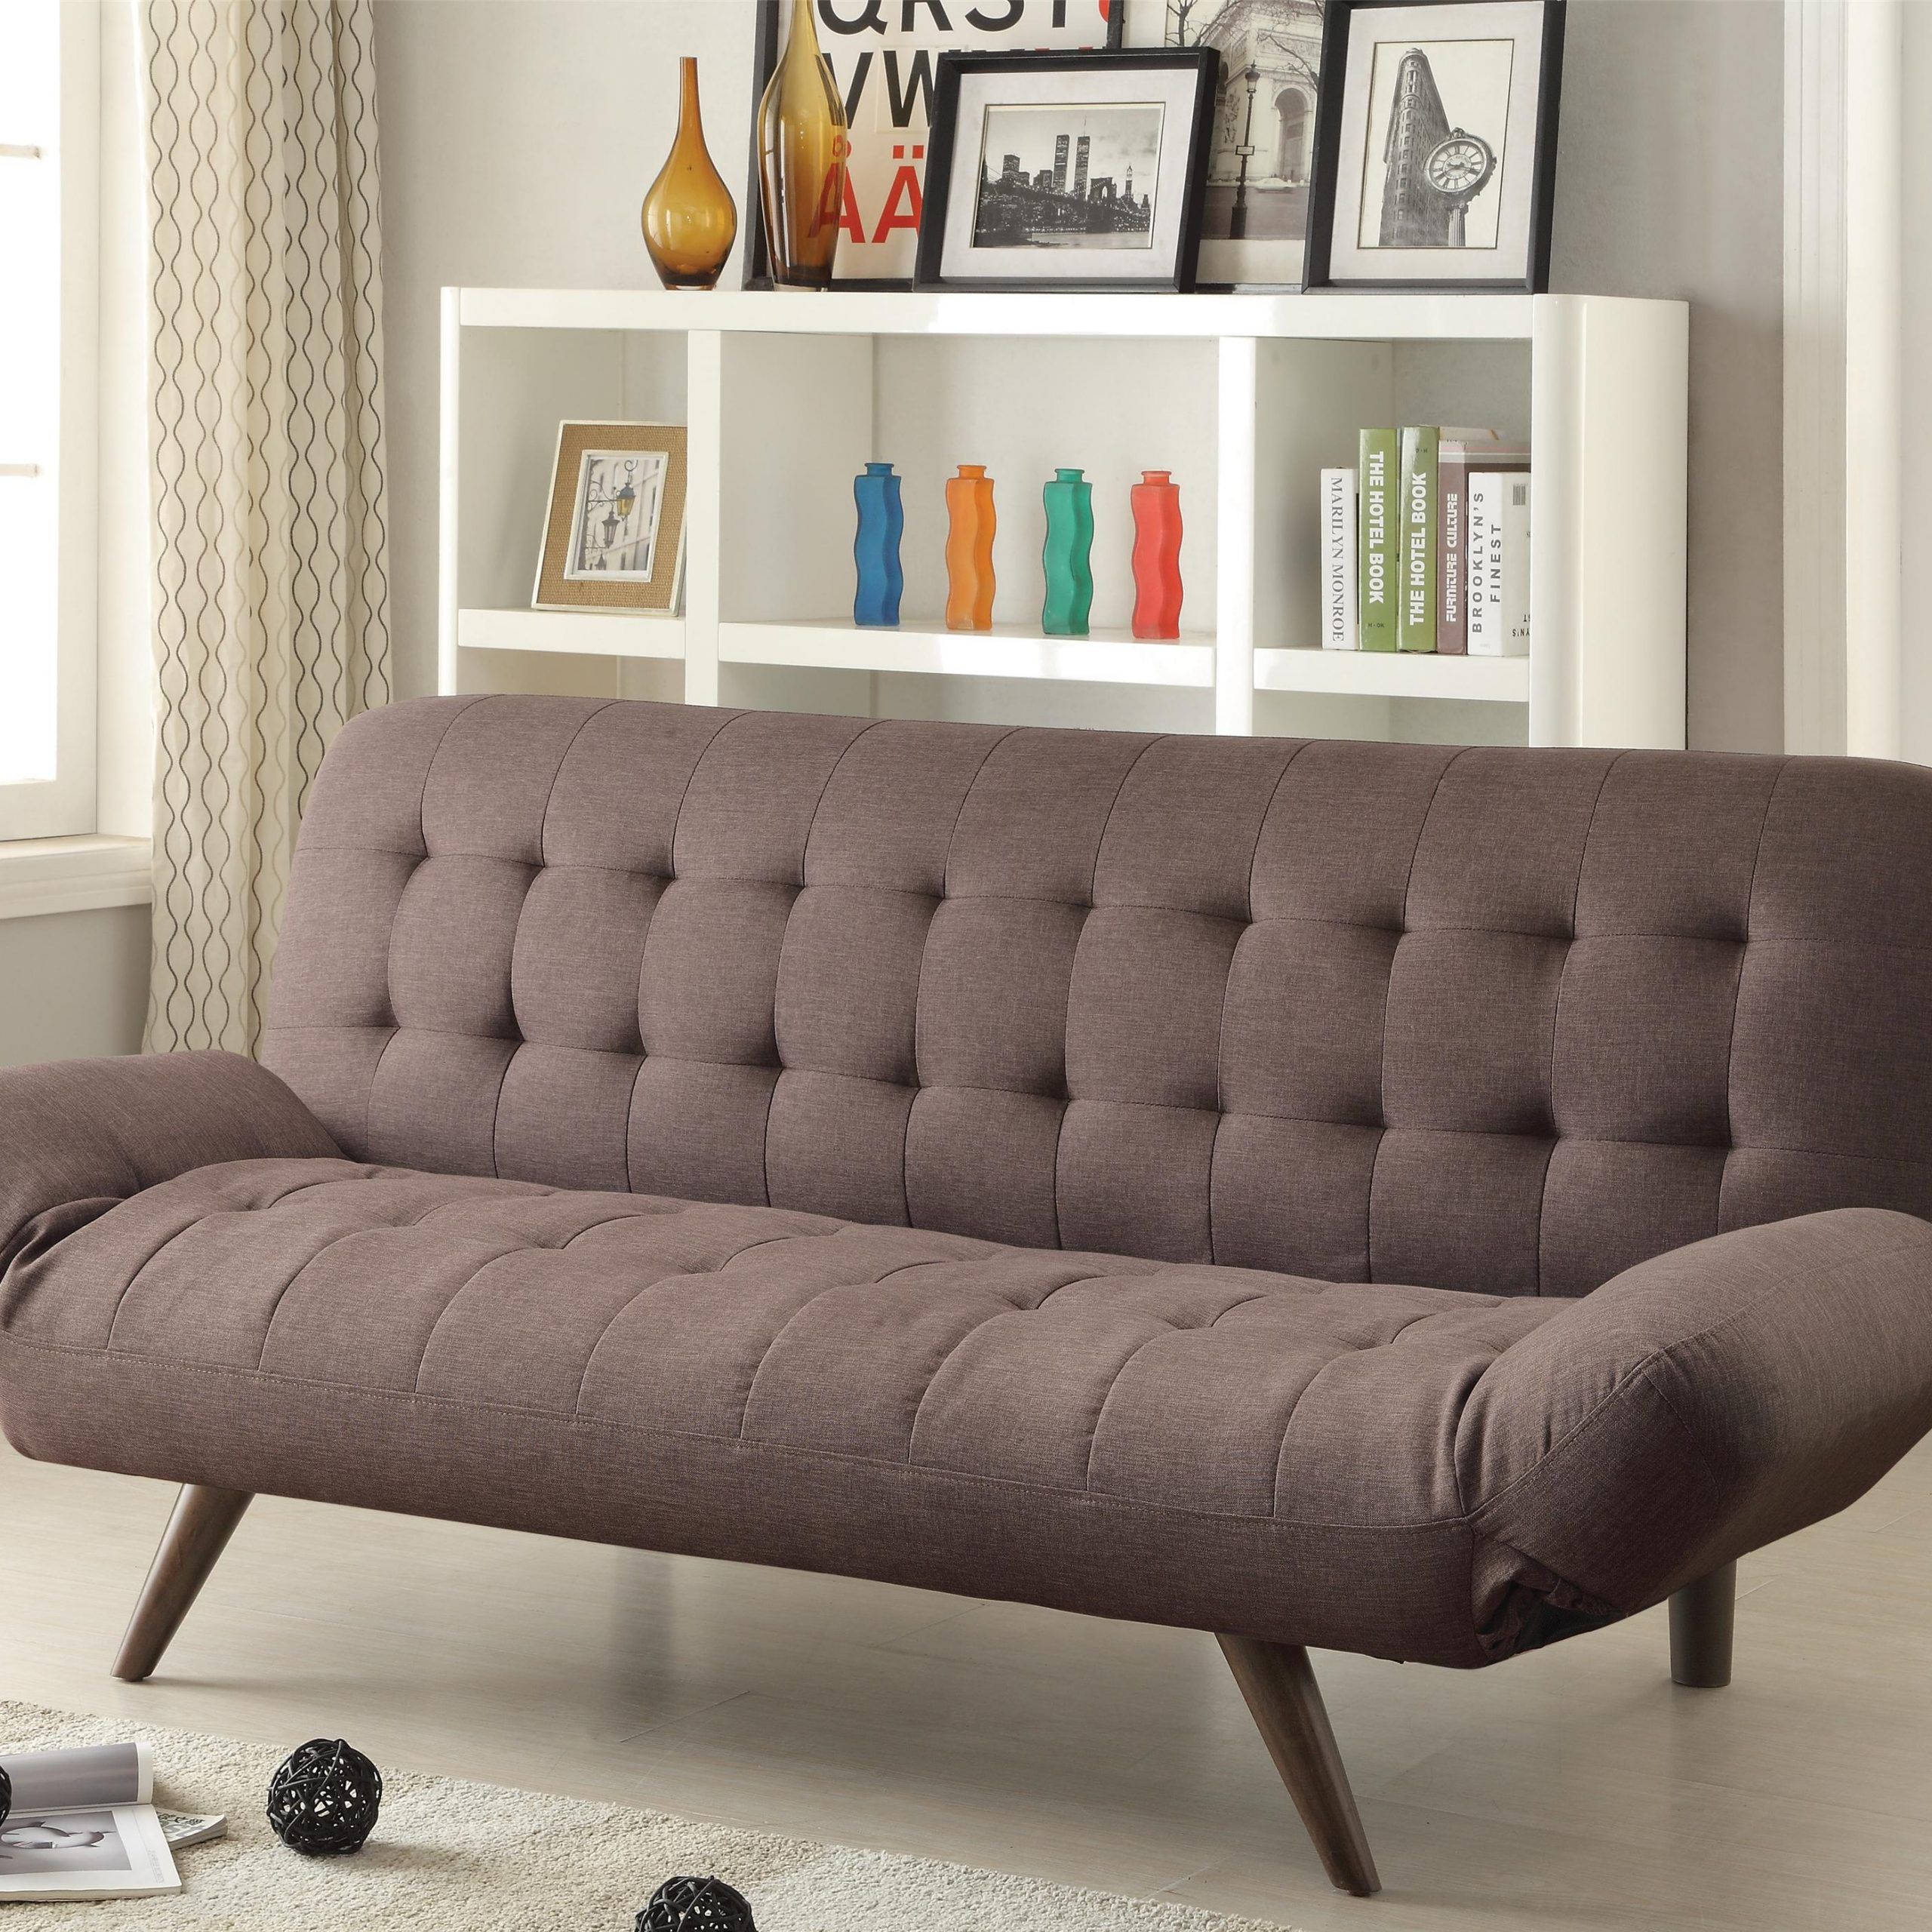 Sofa Beds And Futons Retro Modern Sofa Bed With Tufting Regarding Easton Small Space Sectional Futon Sofas (View 8 of 15)